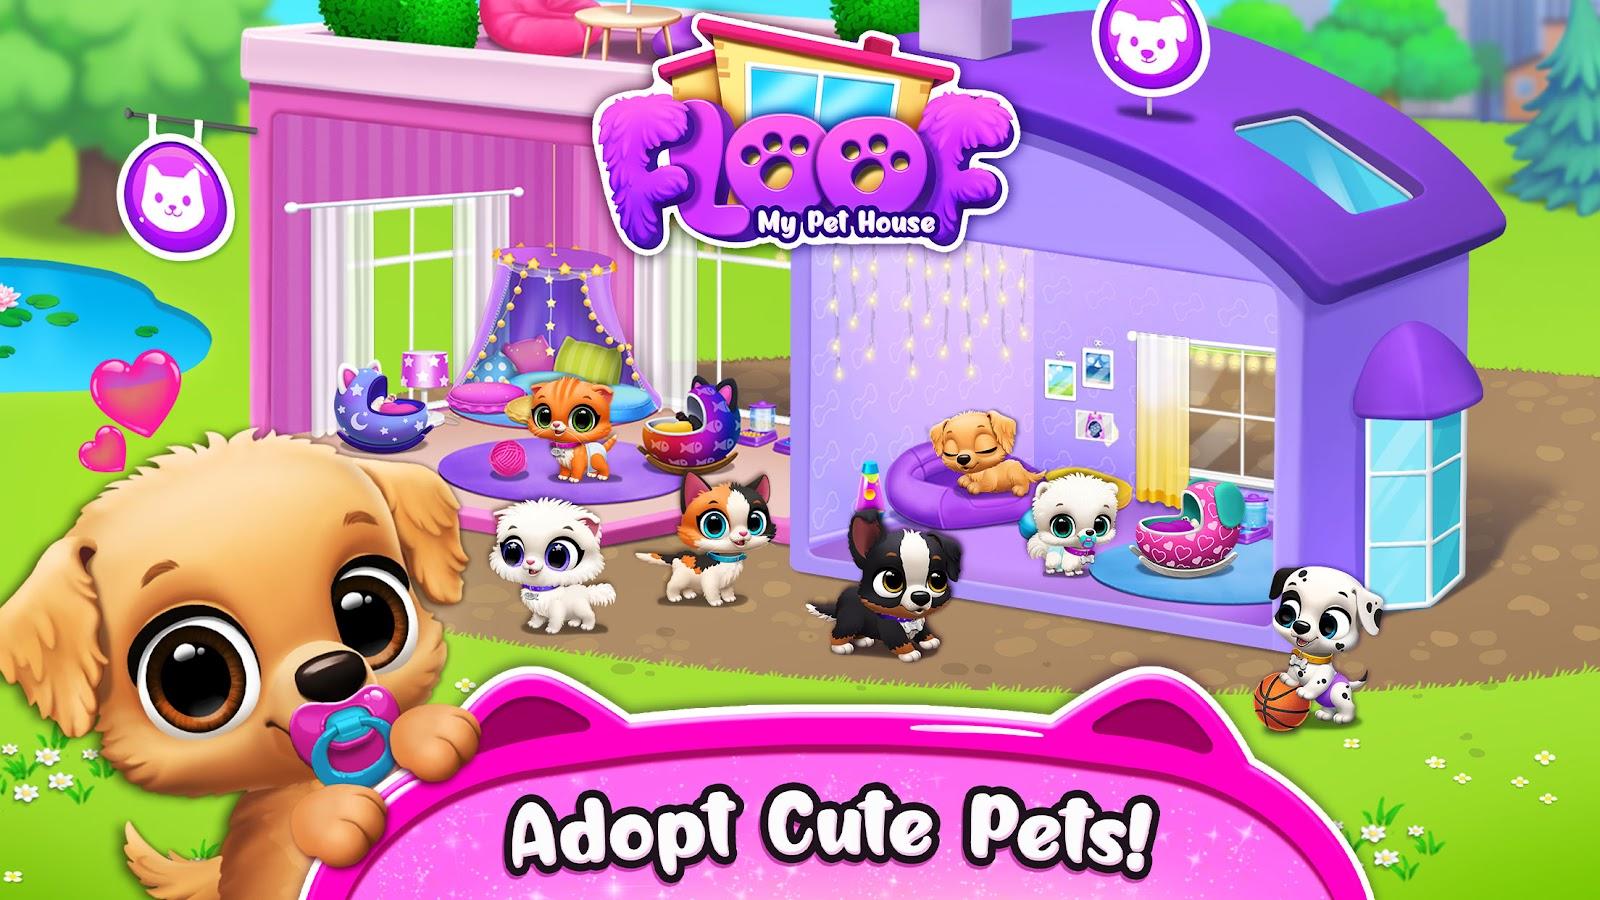 FLOOF Pet House & Cat Games v4.0.15 APK for Android